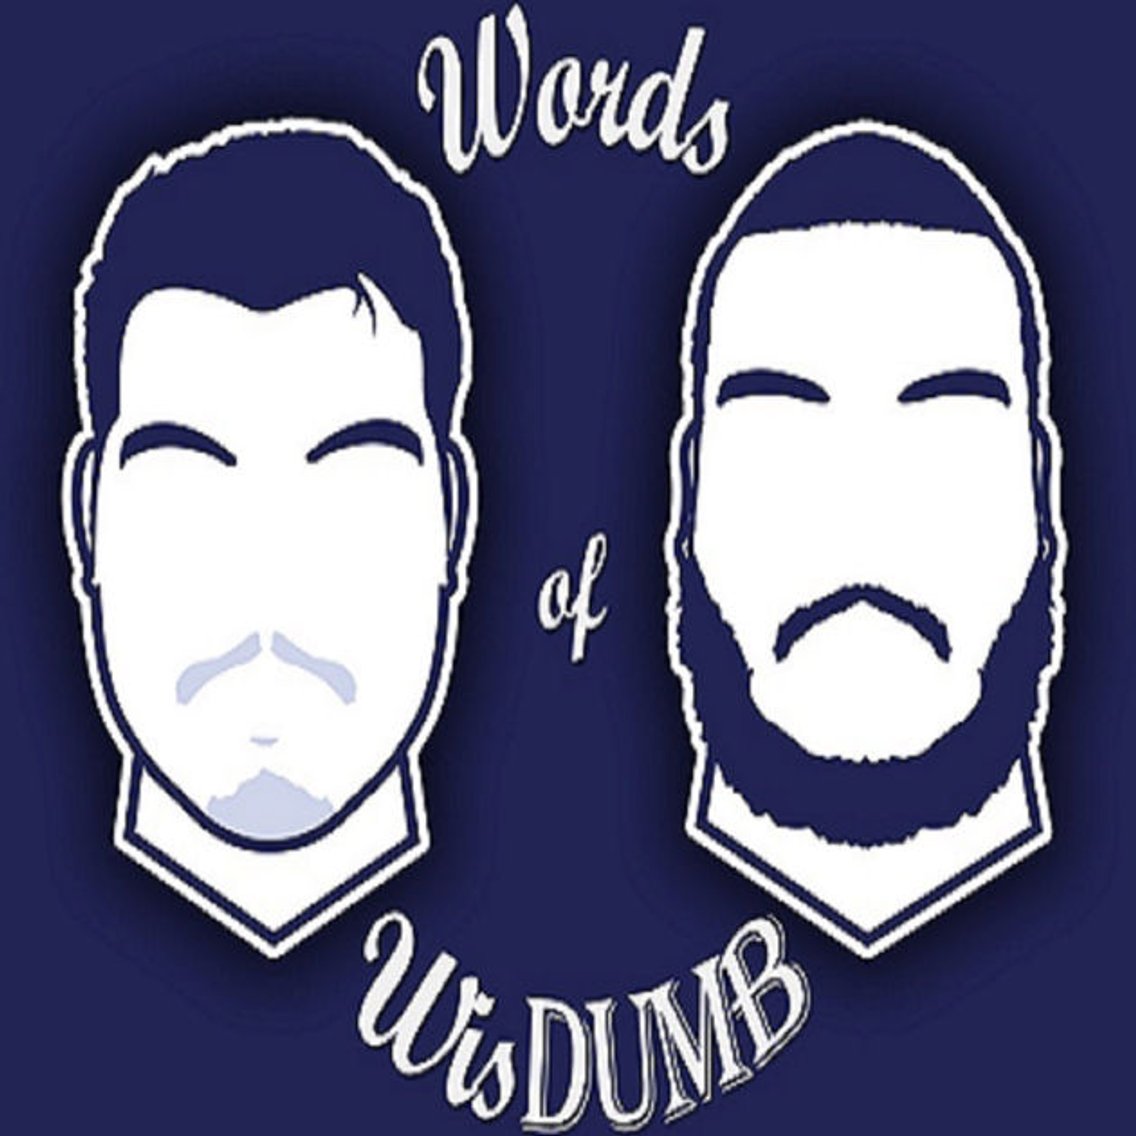 Words of Wisdumb Podcast - Cover Image